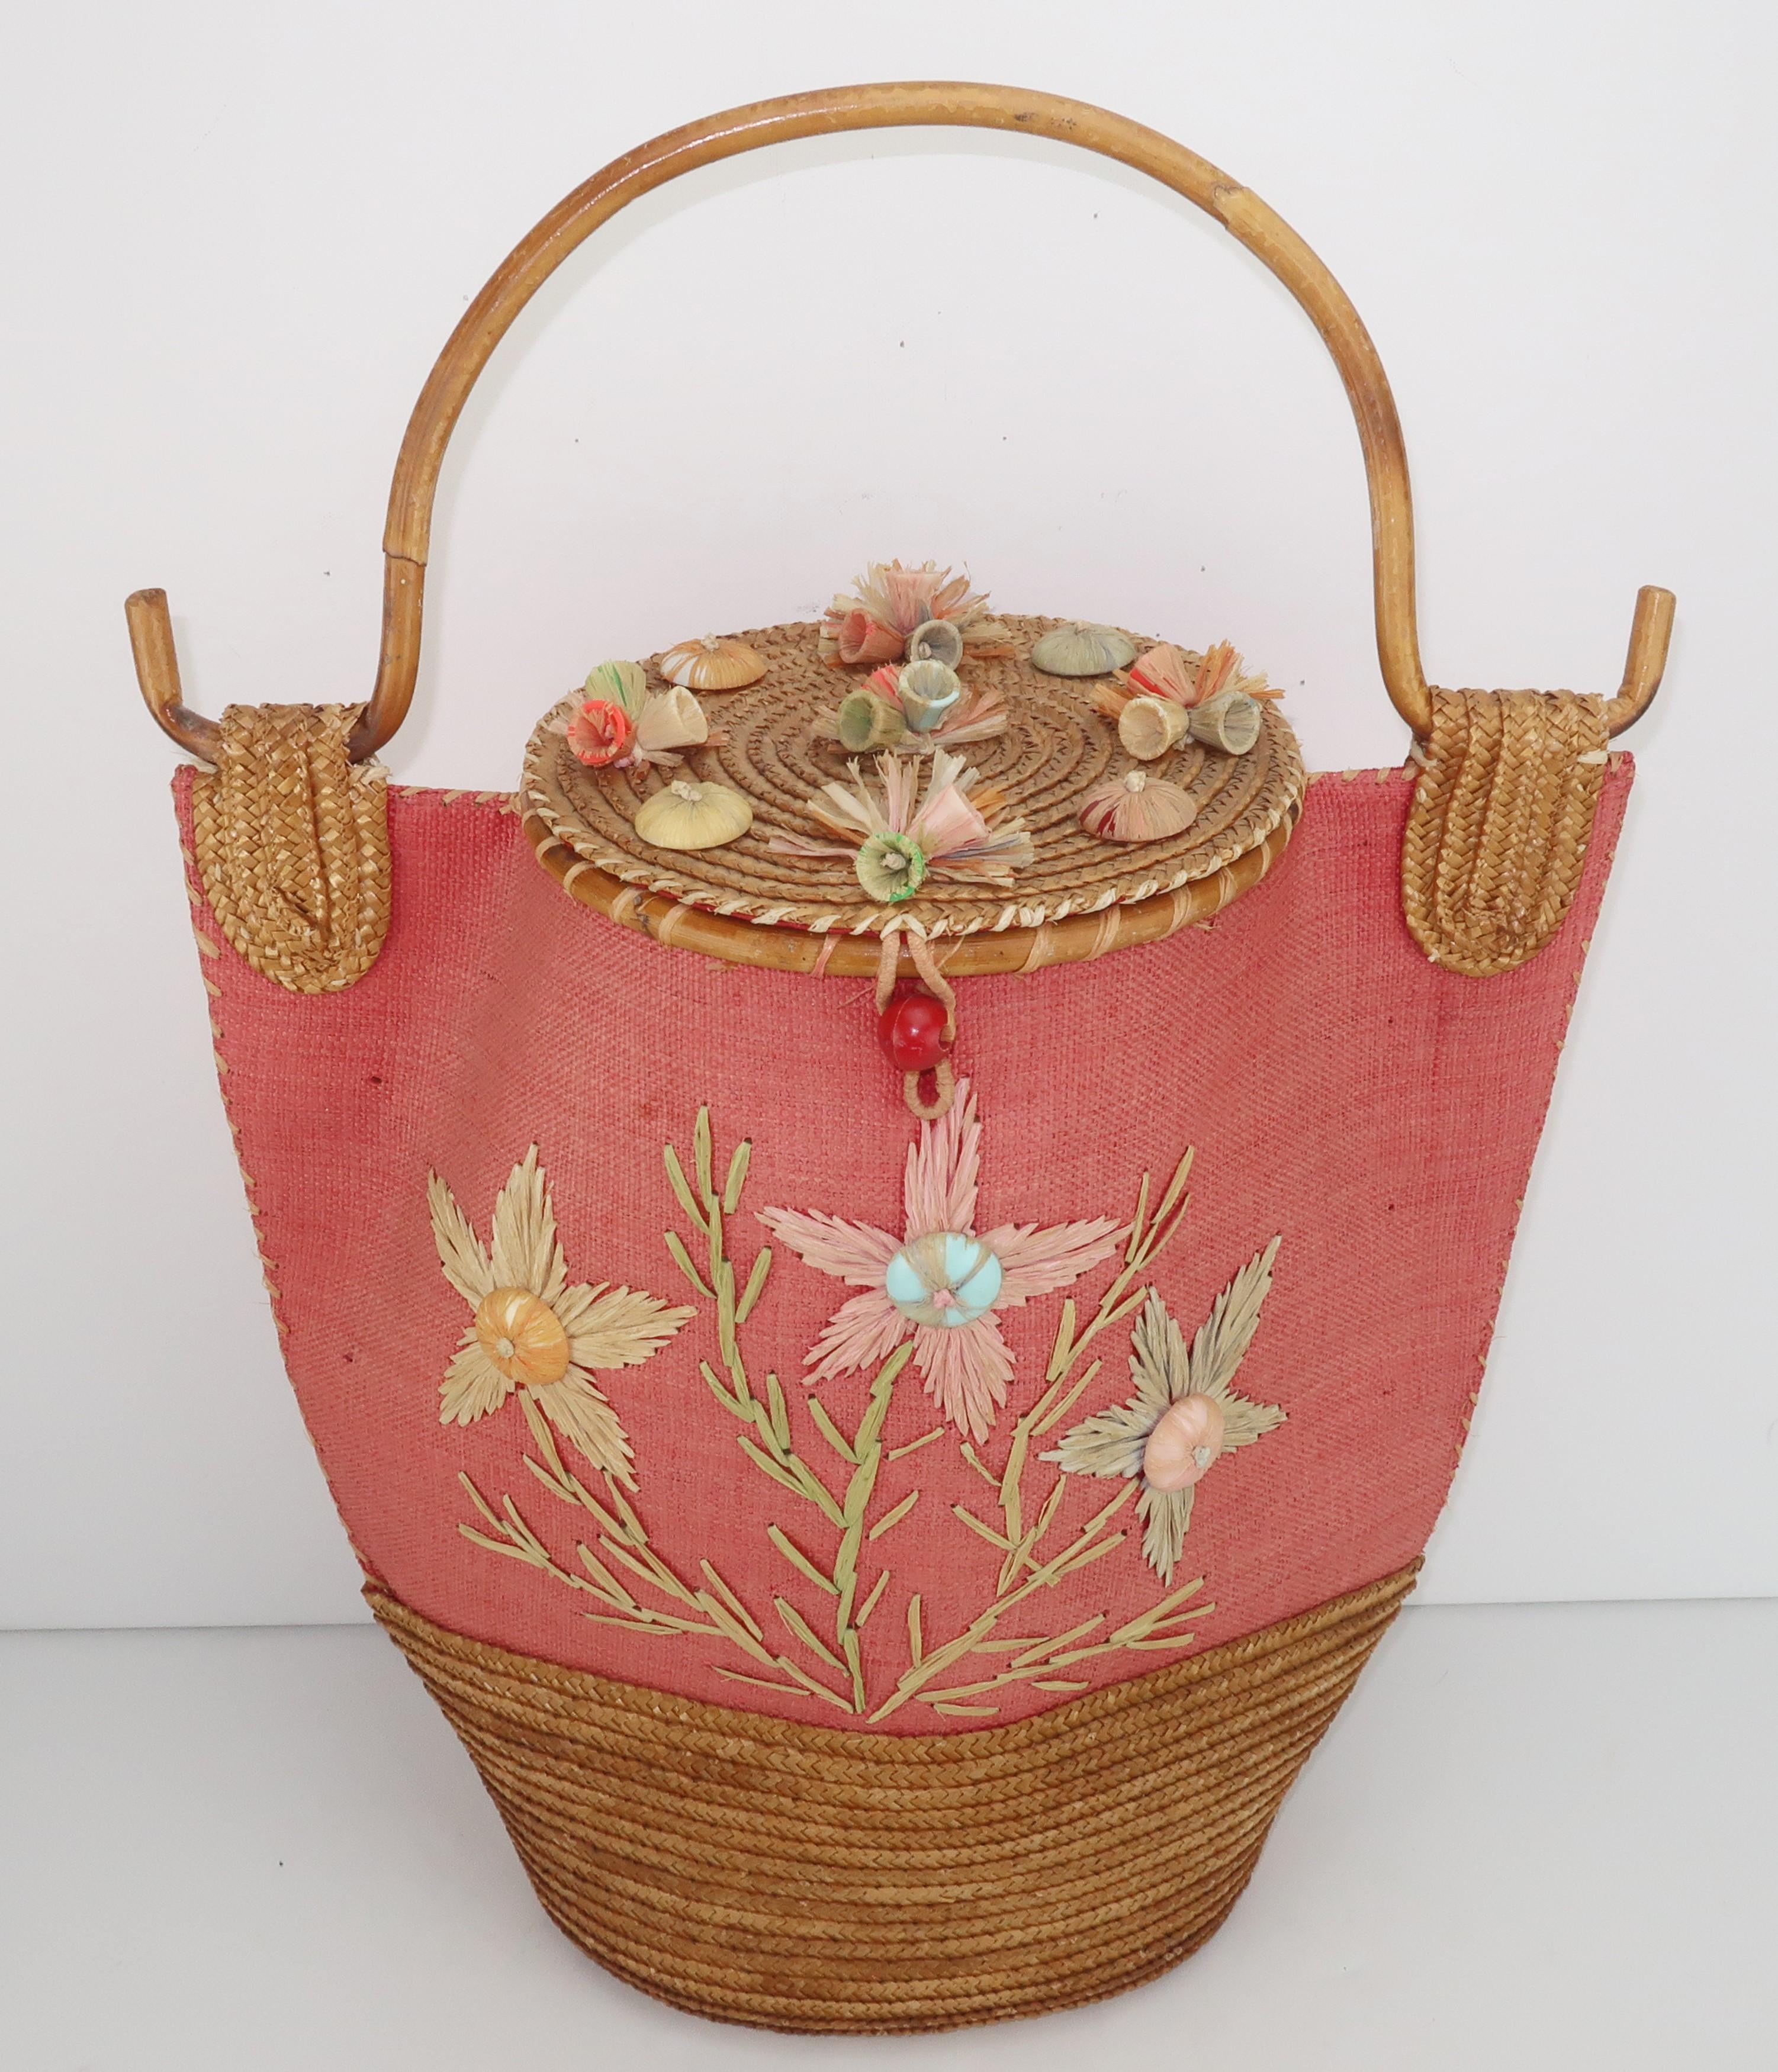 This look would be right at home on the Riviera ... an amazing 1950's Italian straw handbag with bamboo handle and raffia decoration.  The coral grasscloth body has a straw base and lid with raffia decorated plastic buttons and bells incorporating